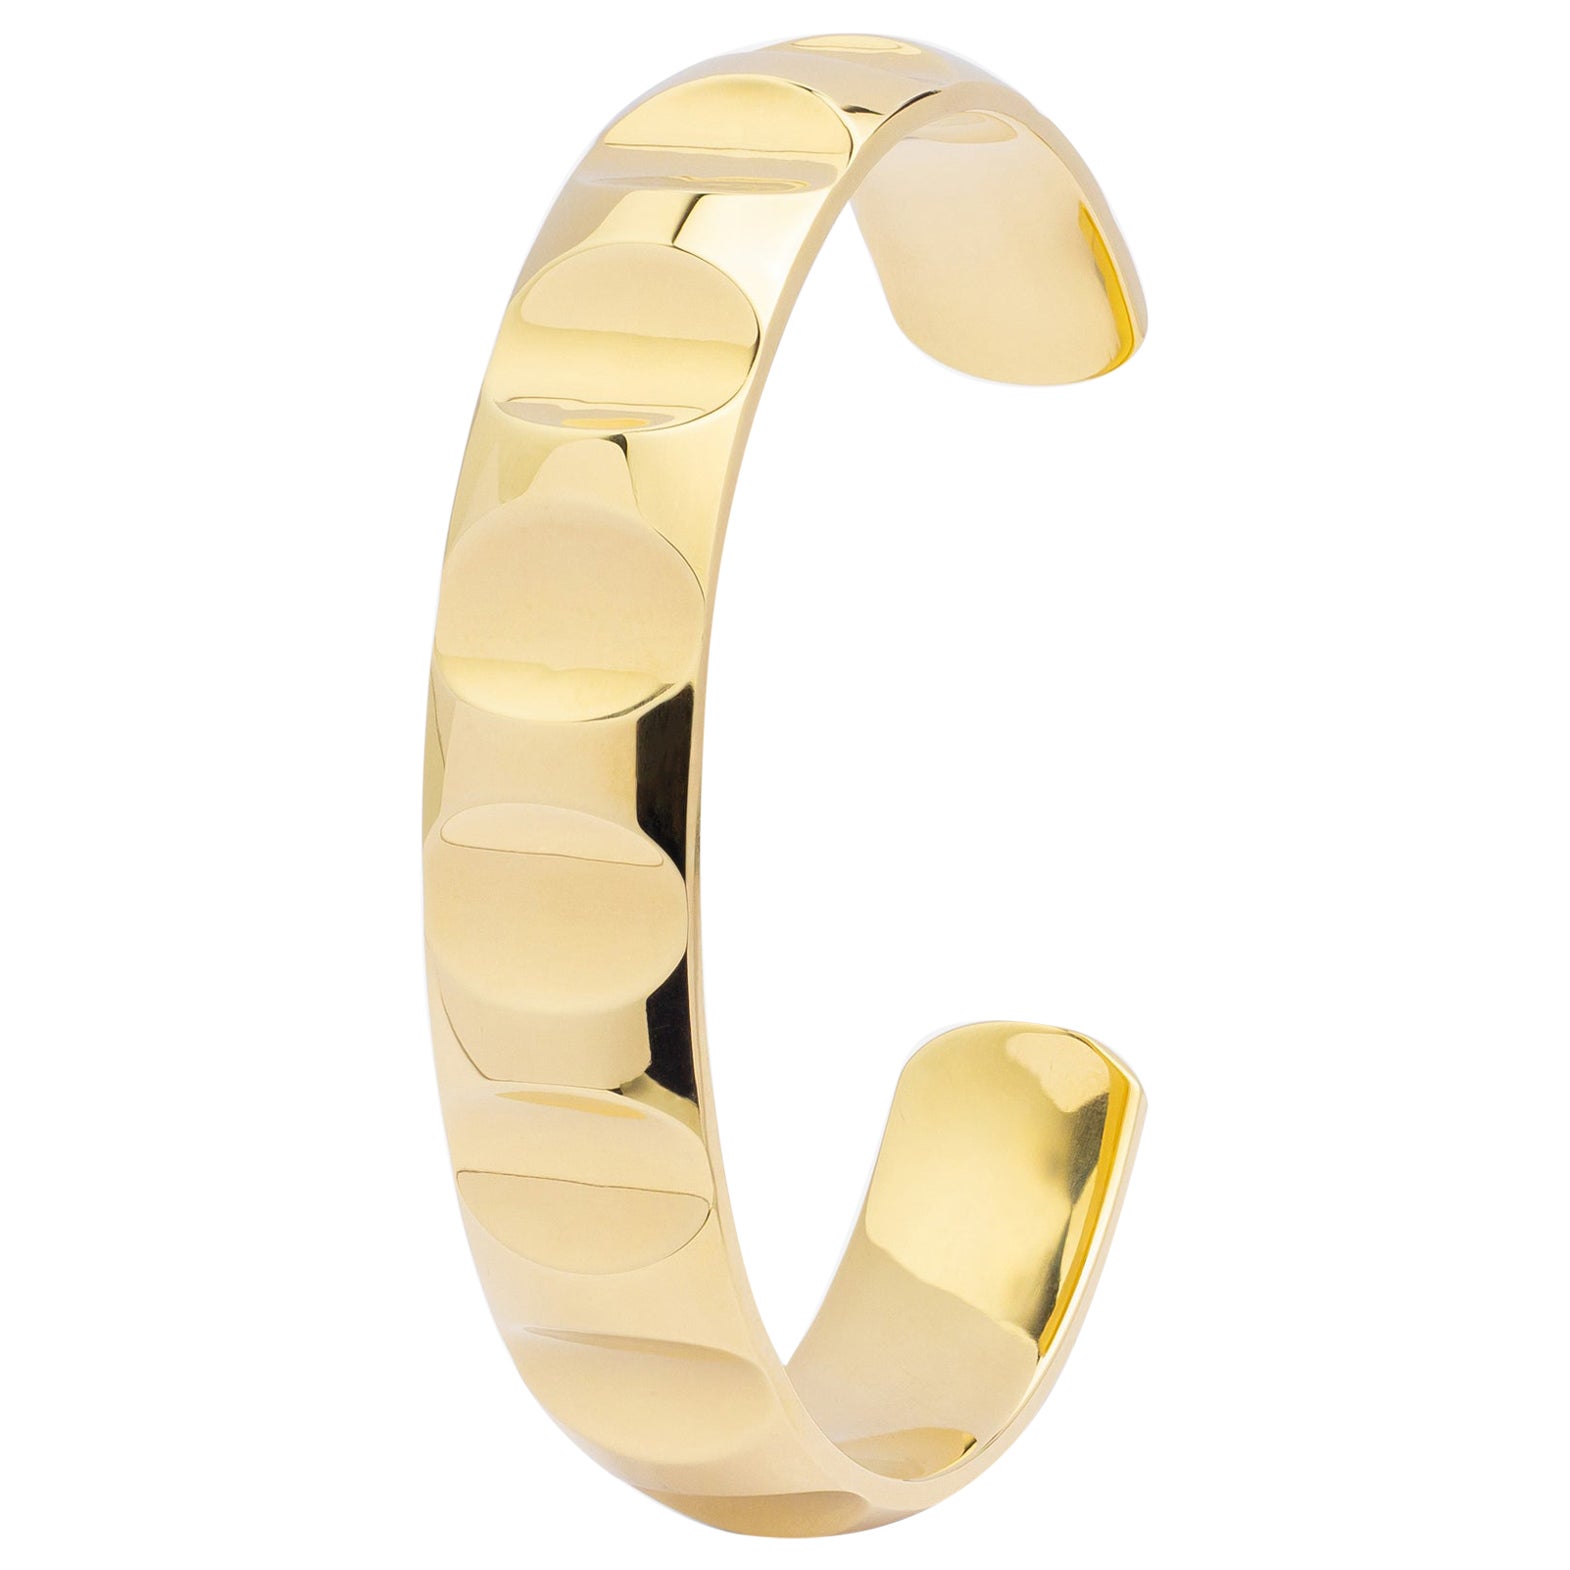 18 Karat Gold, Paloma Picasso For Tiffany & Co 'Groove' Cuff